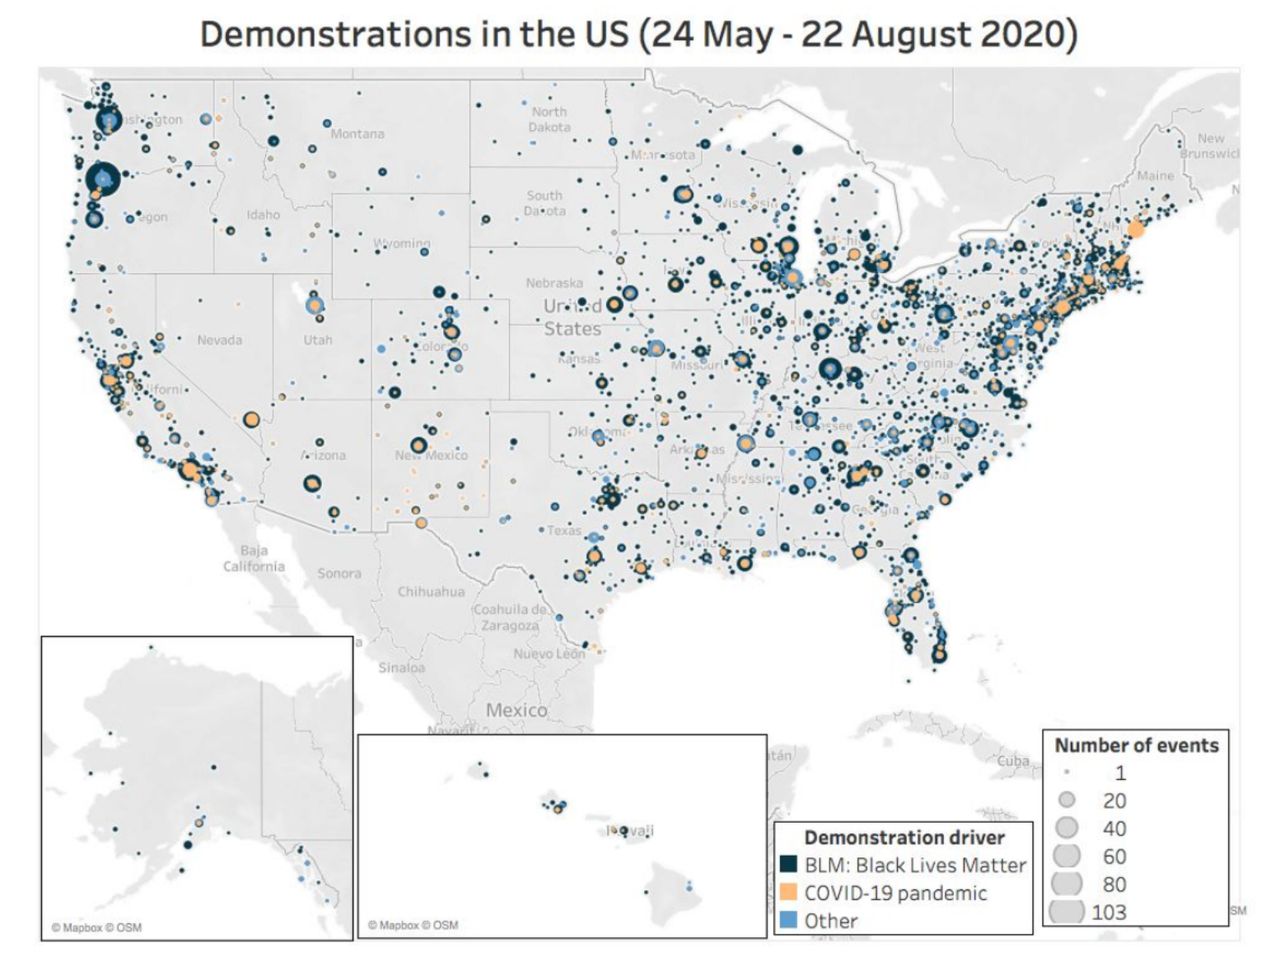 Another long, hot summer in America: The Armed Conflict Location & Event Data Project identified nearly 11,000 demonstrations in the U.S. between May 24 and Aug. 22, 2020.